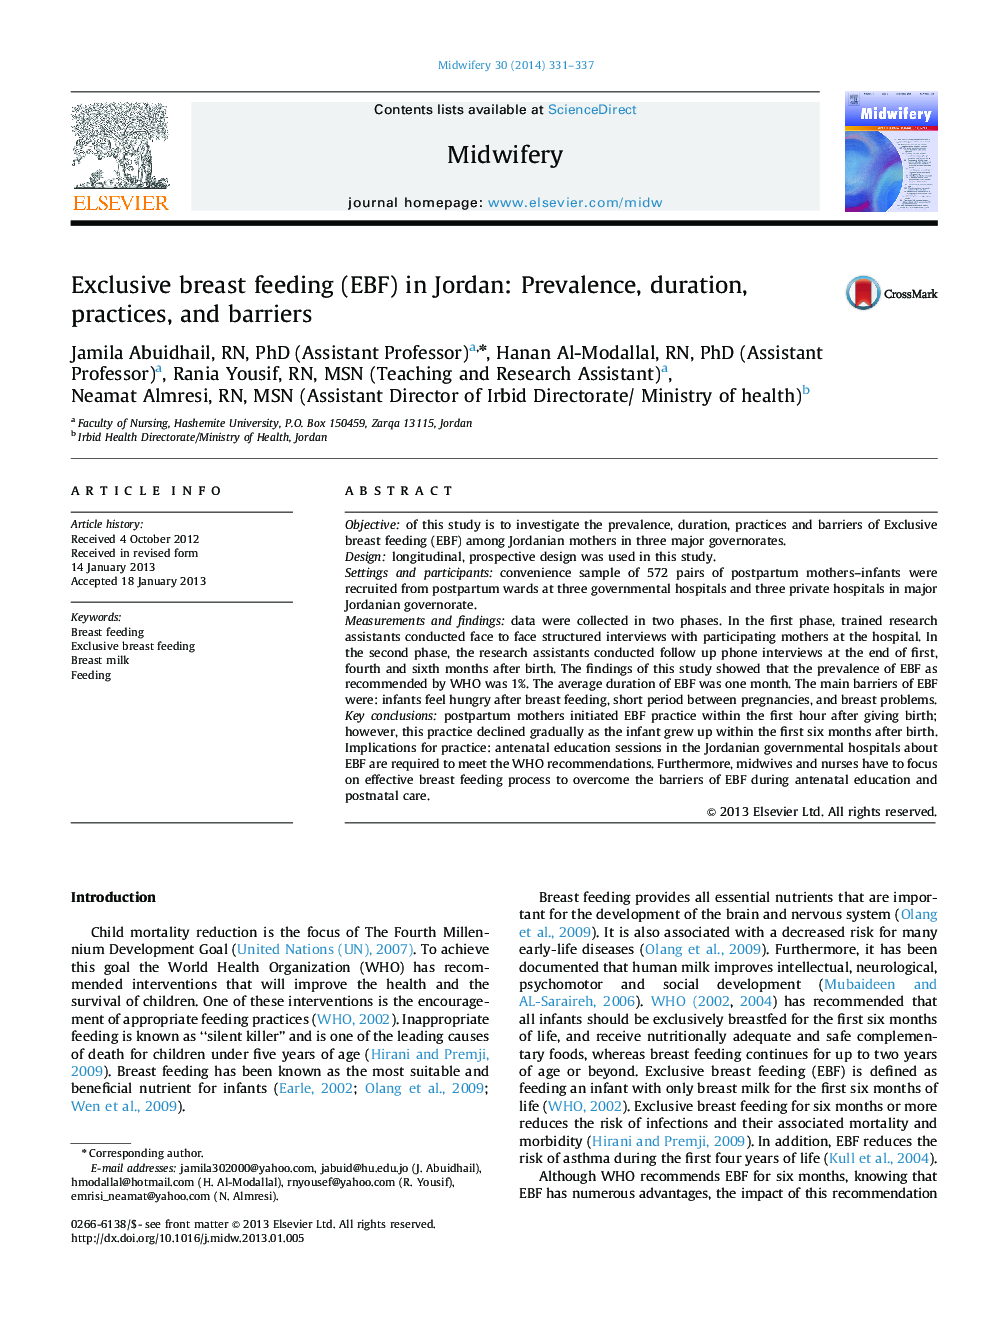 Exclusive breast feeding (EBF) in Jordan: Prevalence, duration, practices, and barriers